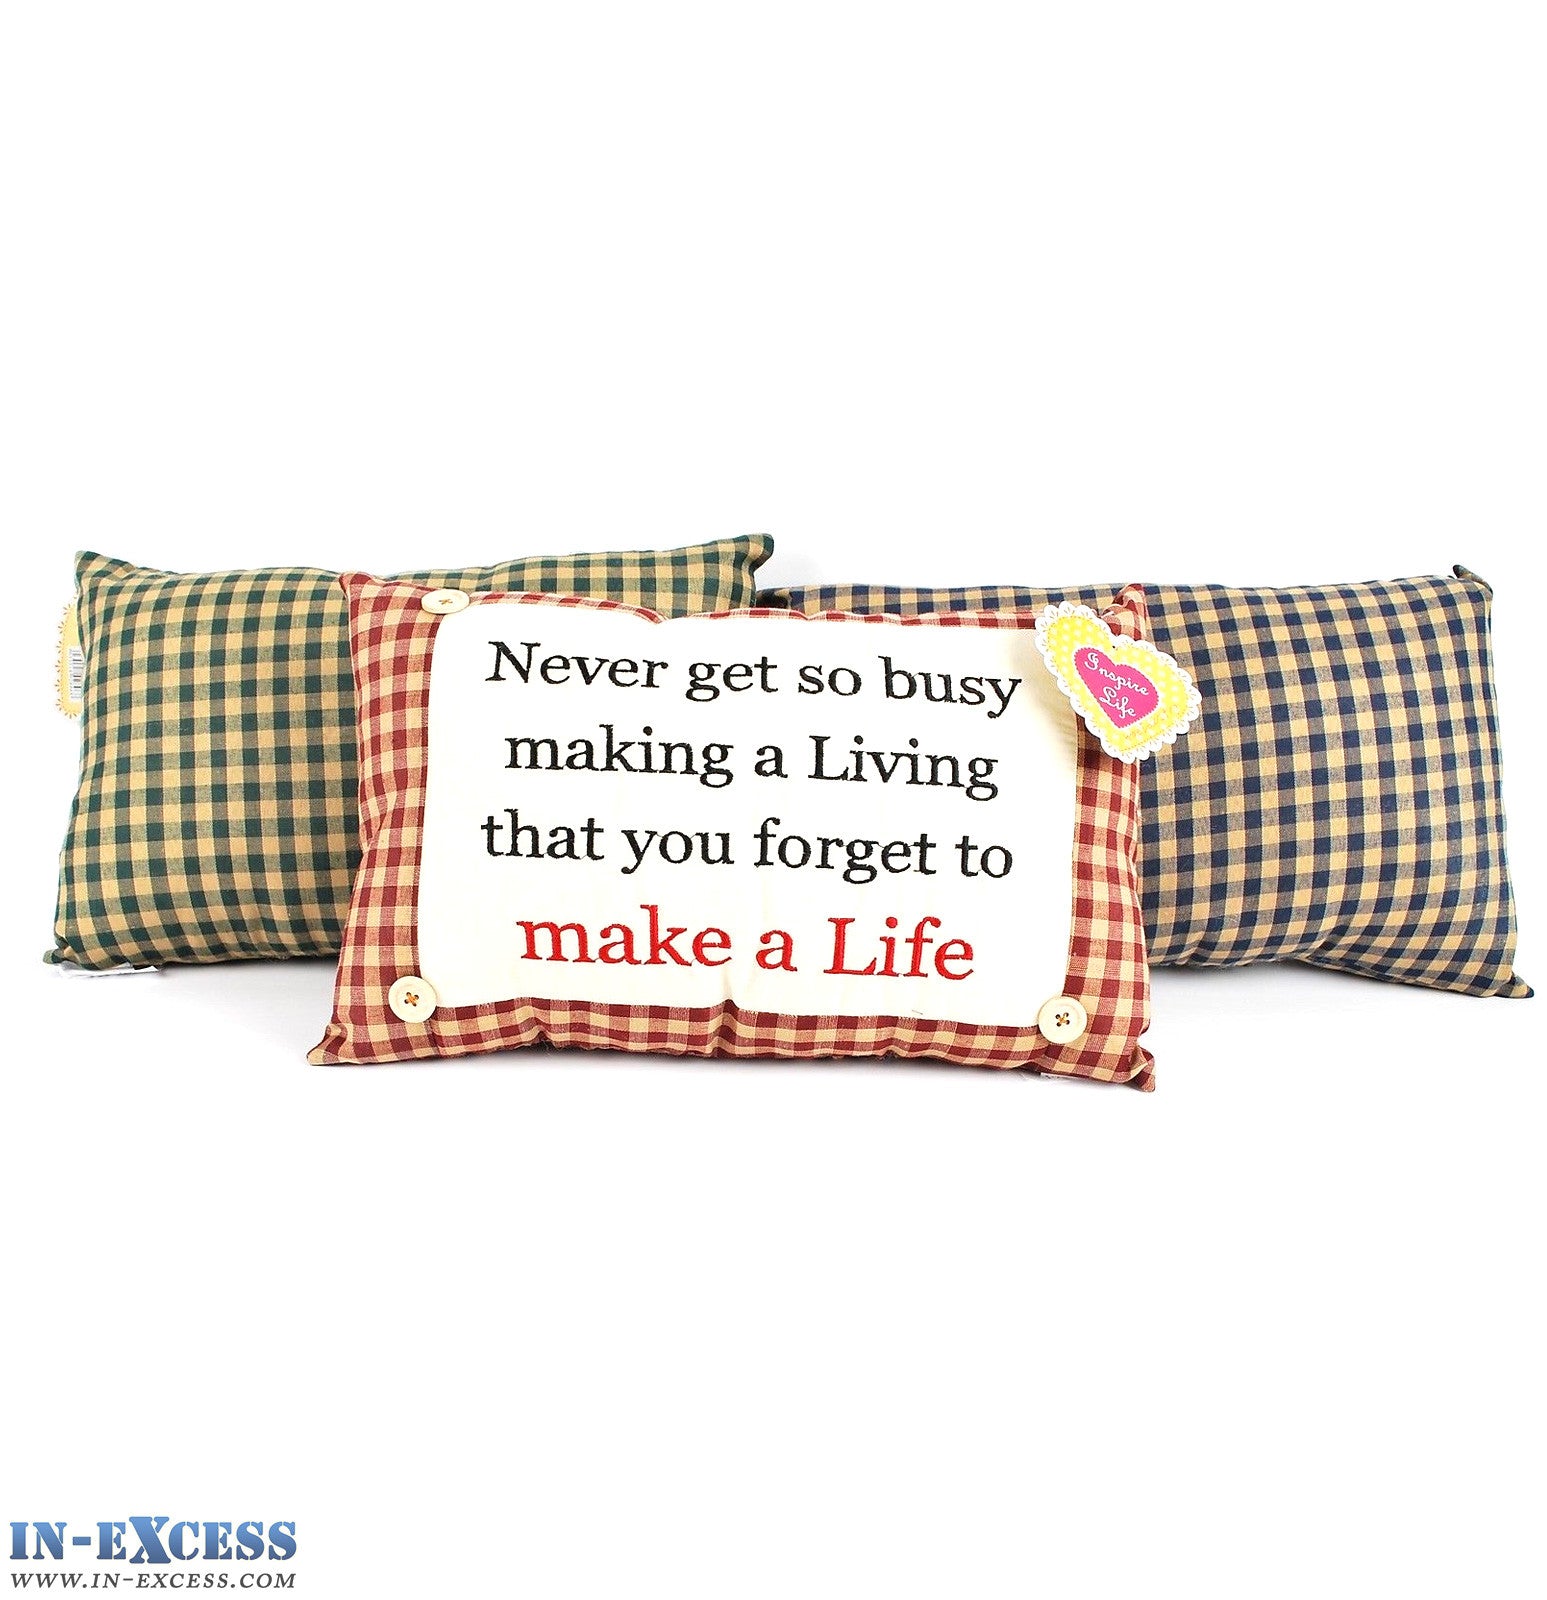 Novelty "Never Get So Busy Making A Living" Cushion 38 x 23cm Blue, Green or Red